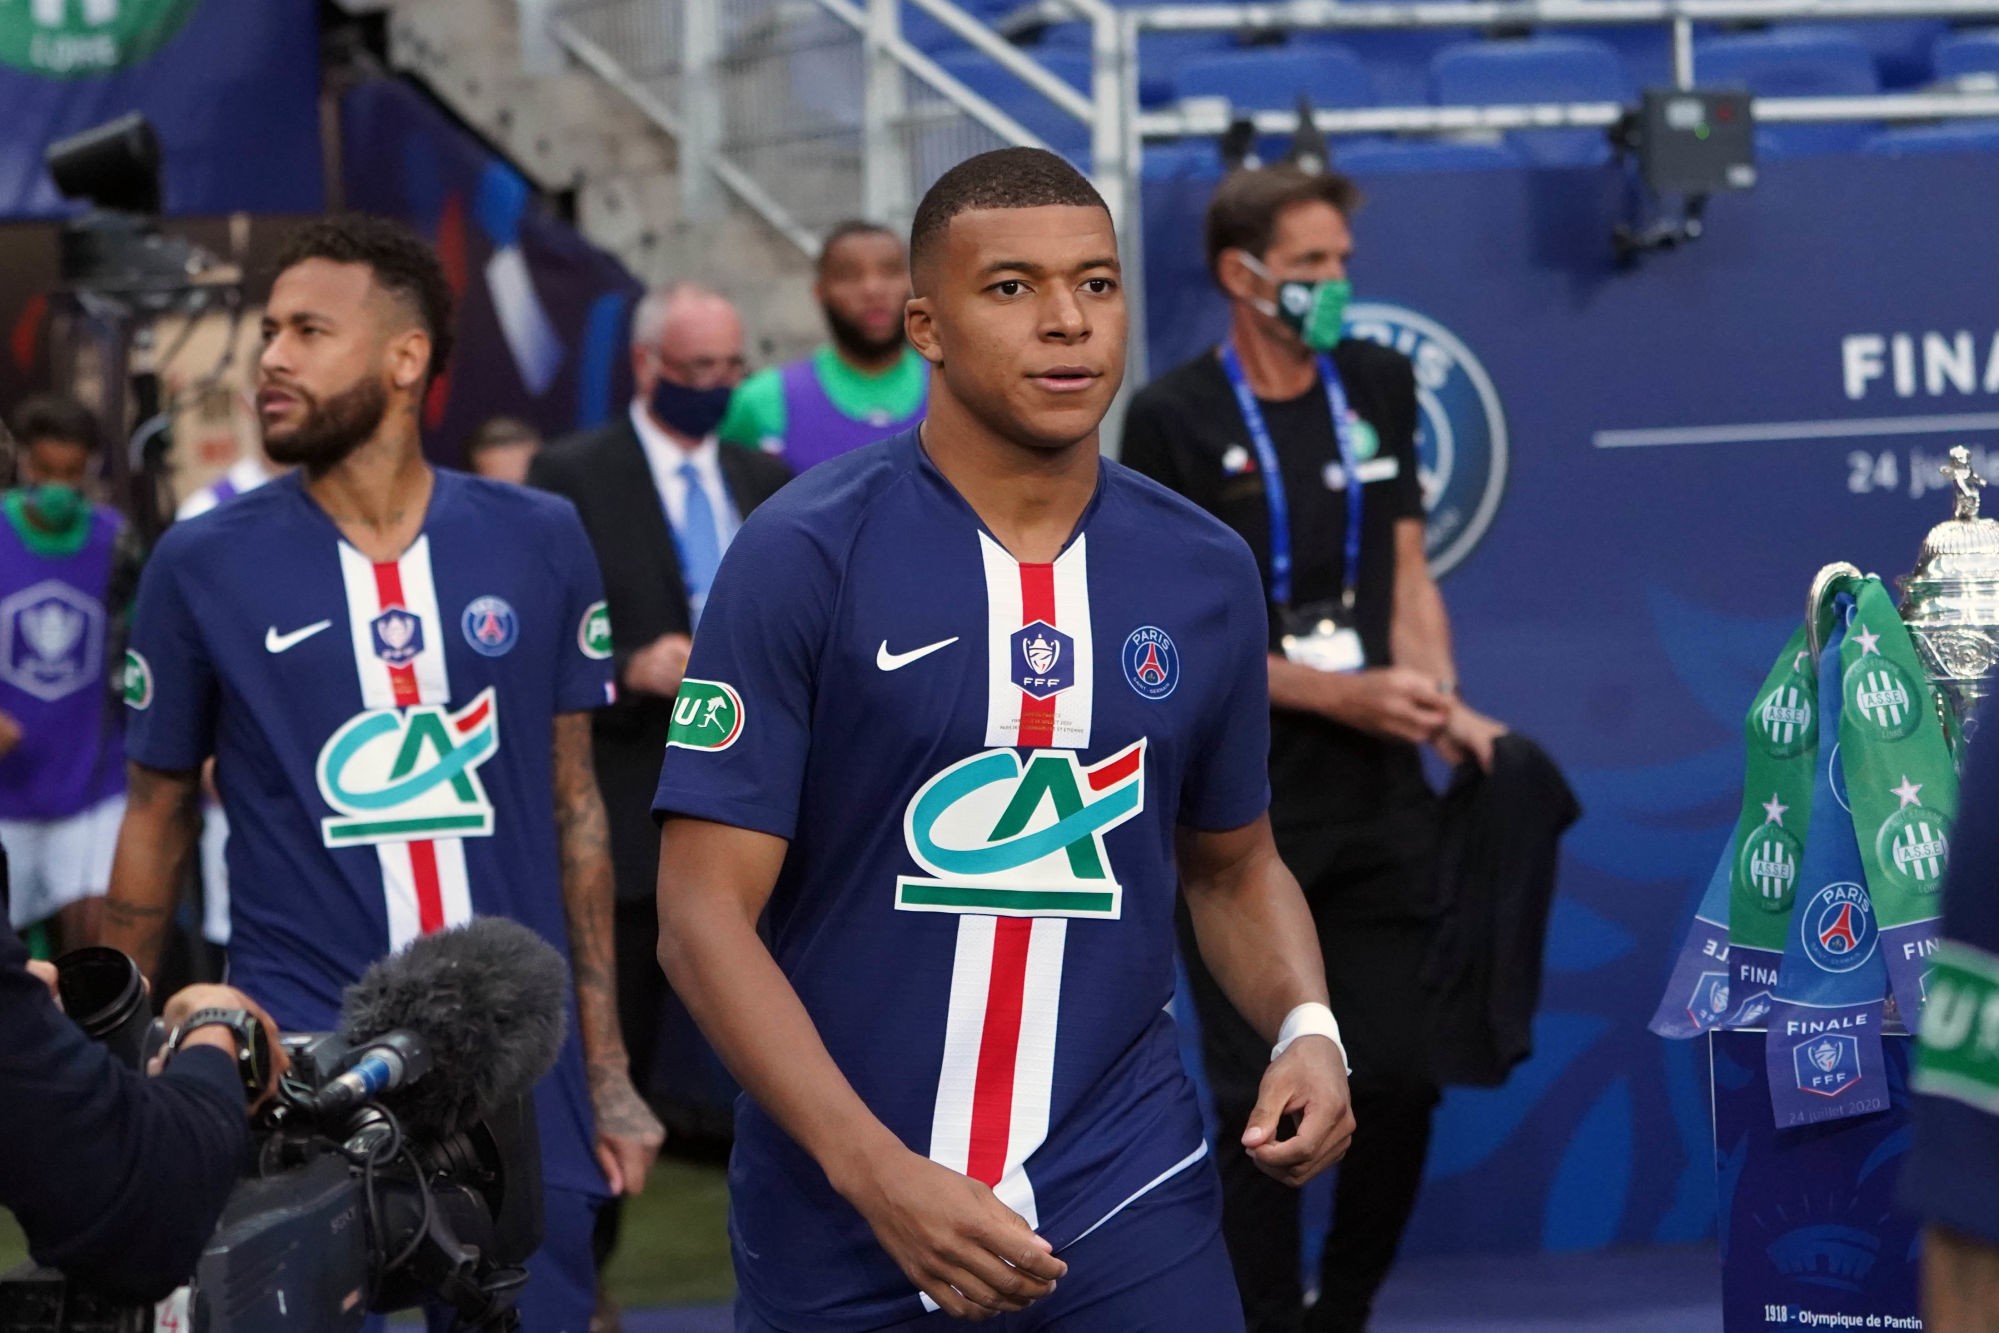 Paris St Germain's Neymar with Kylian Mbappe  before the French Cup Final match between Paris Saint Germain and Saint Etienne at Stade de France on July 24, 2020 in Paris, France.  
Photo by Icon Sport  - Stade de France - Paris (France)